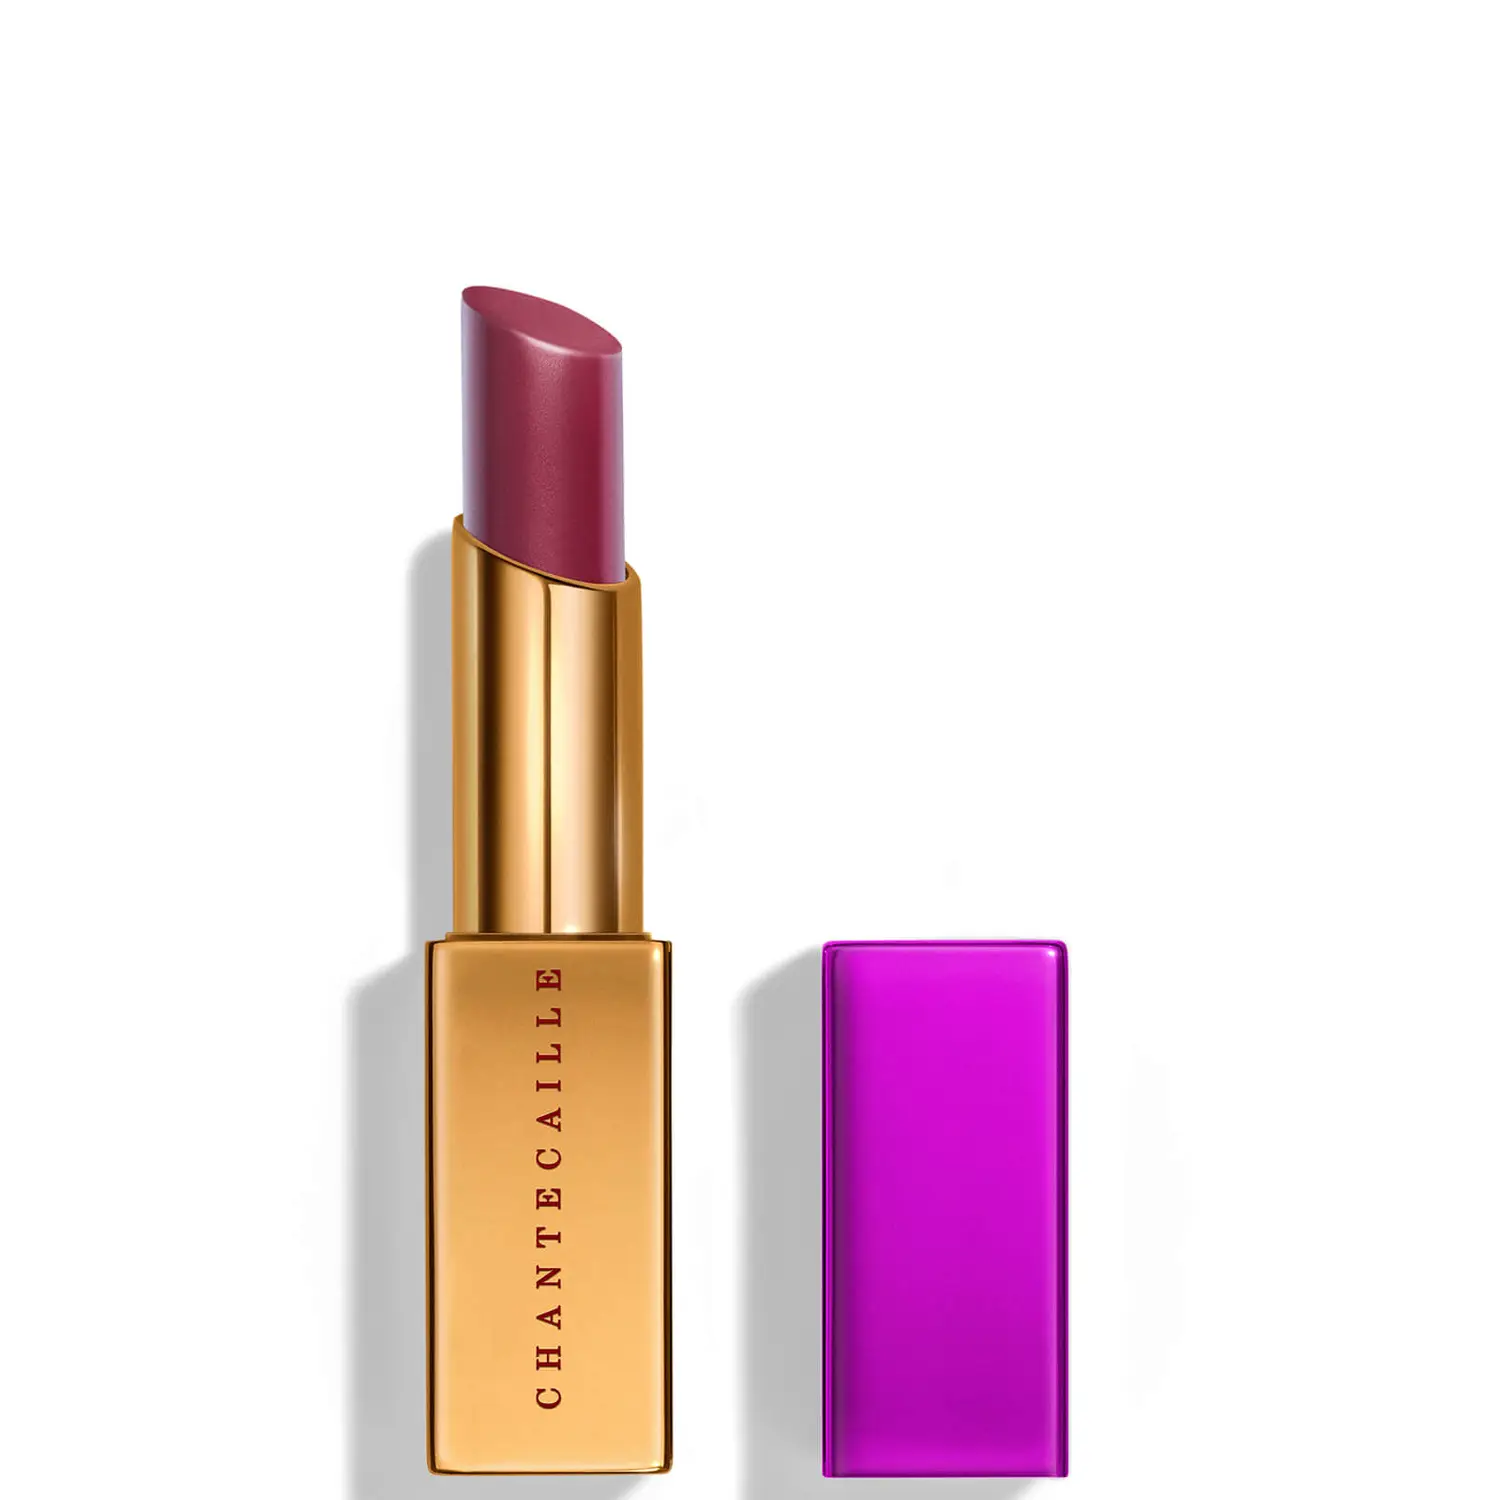 Chantecaille Lip Chic in Damask